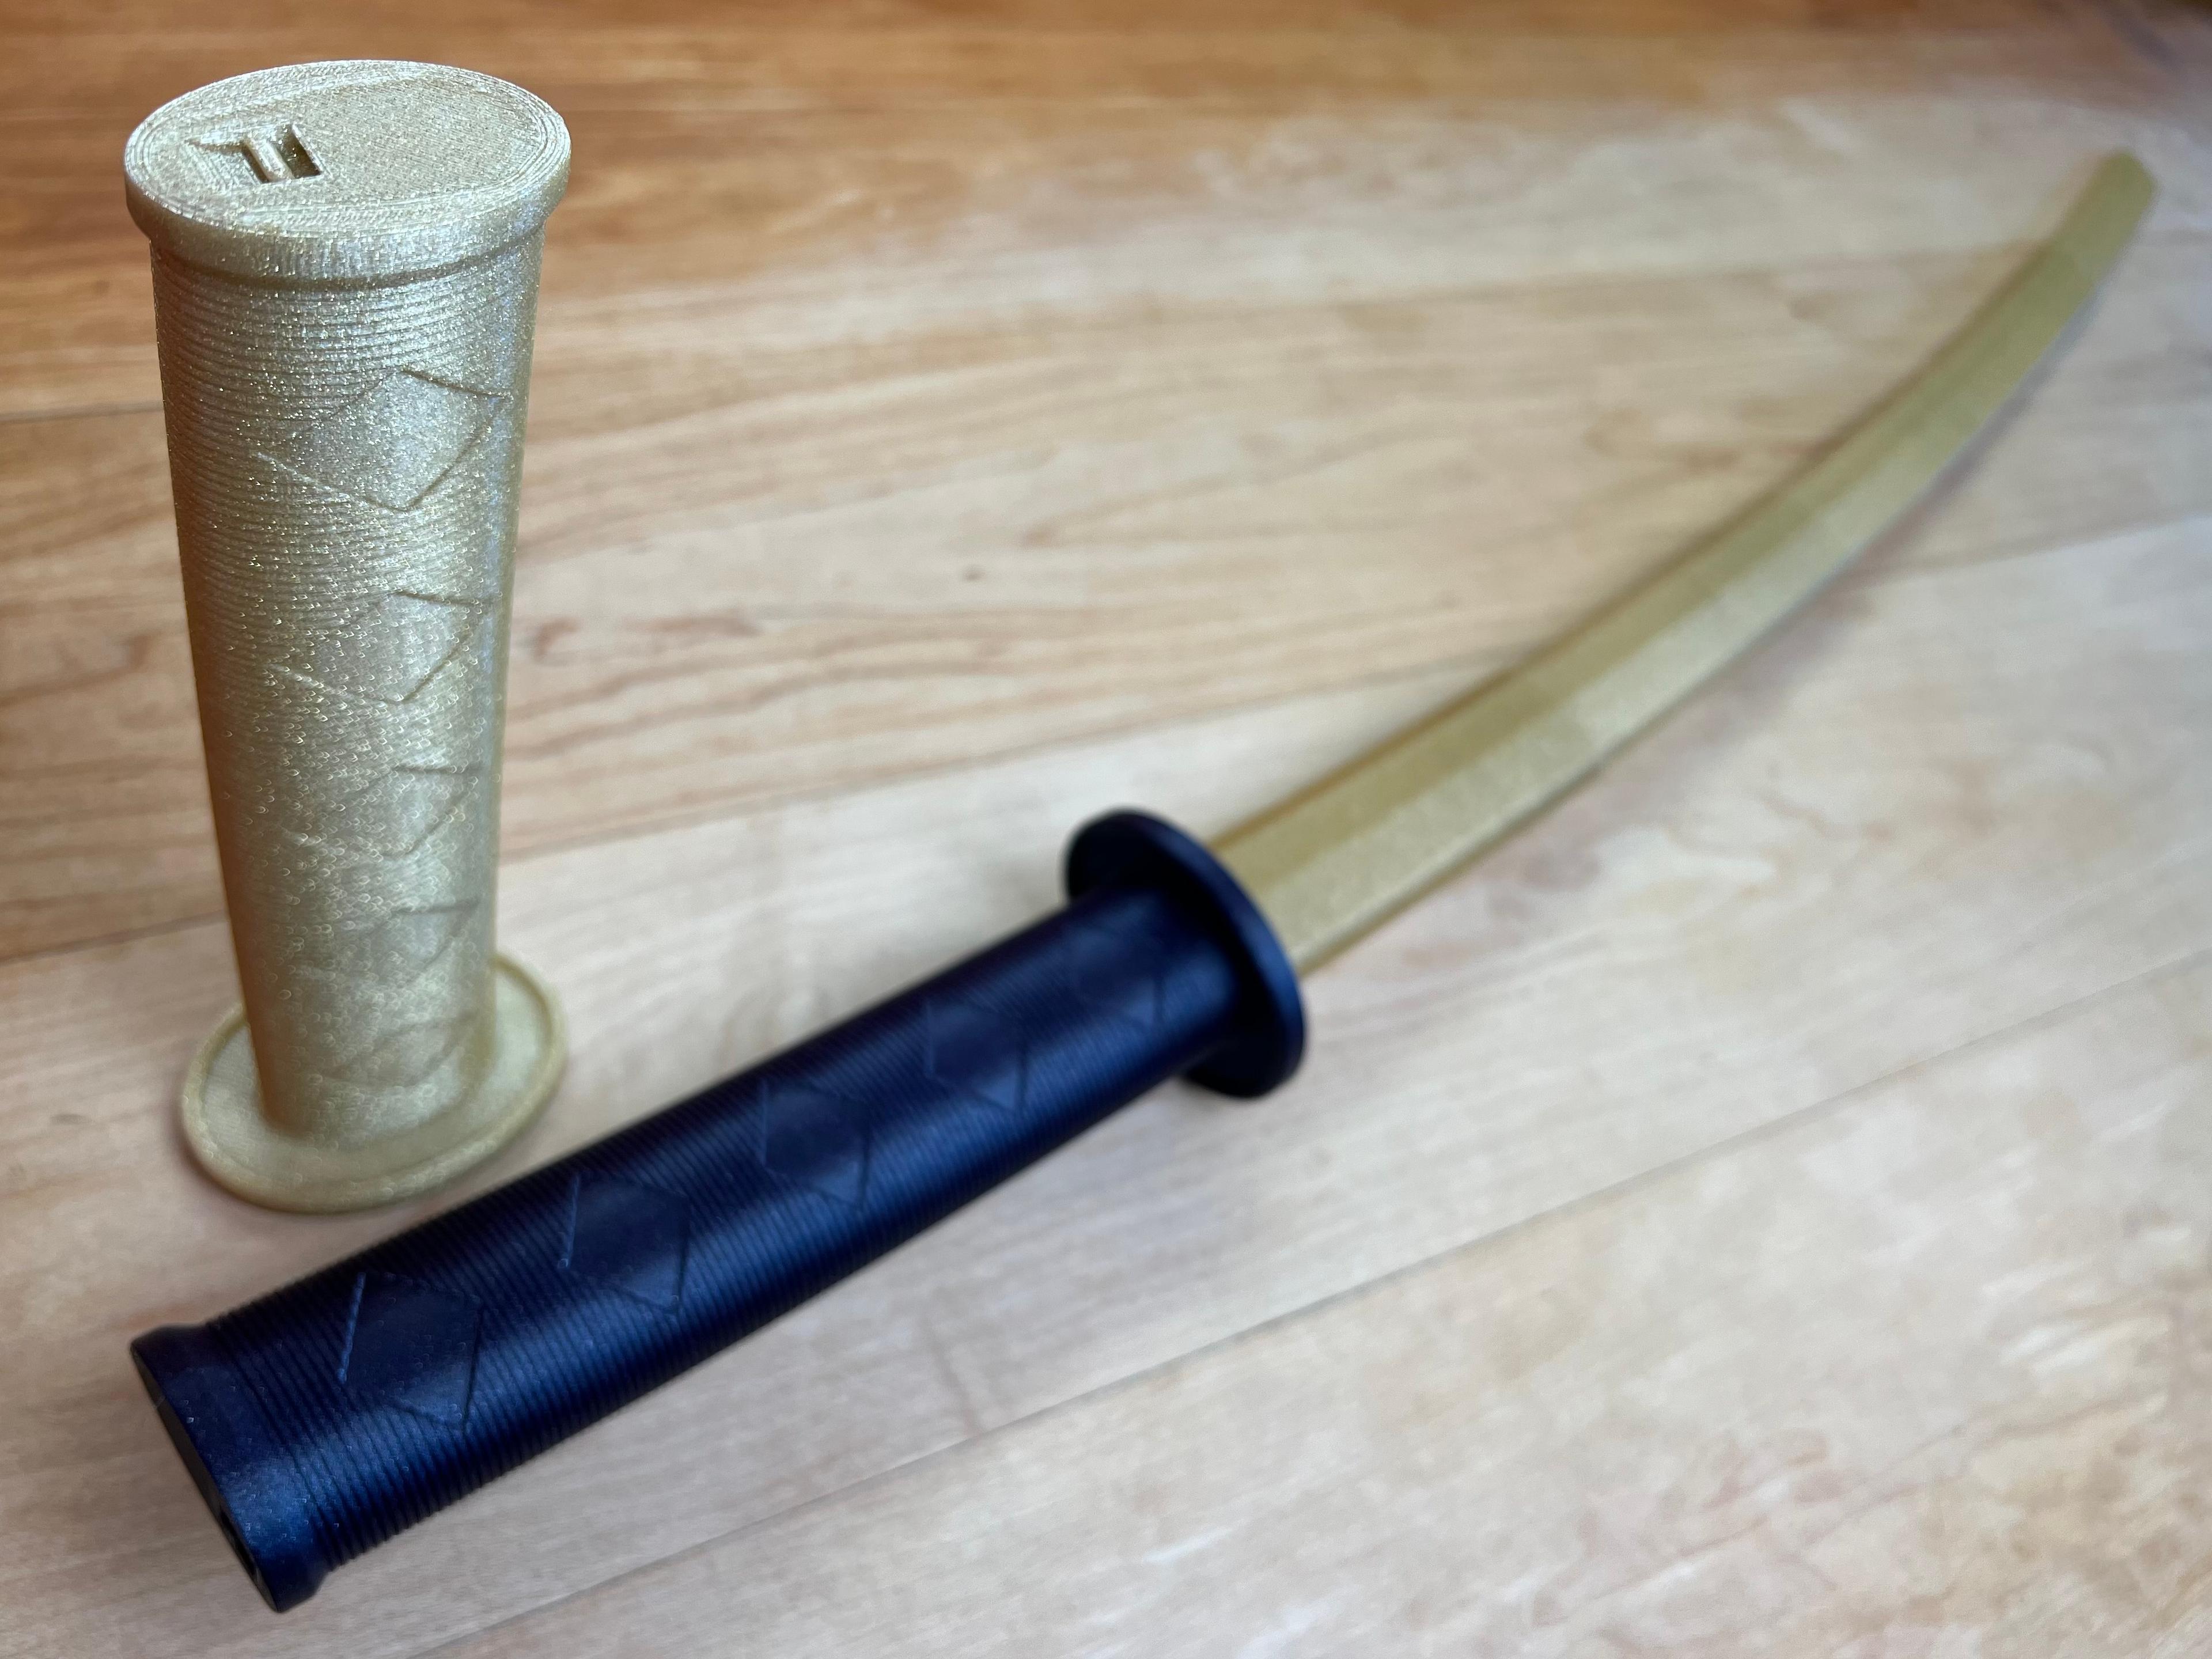 Collapsing Katana with Curved Blade 3d model